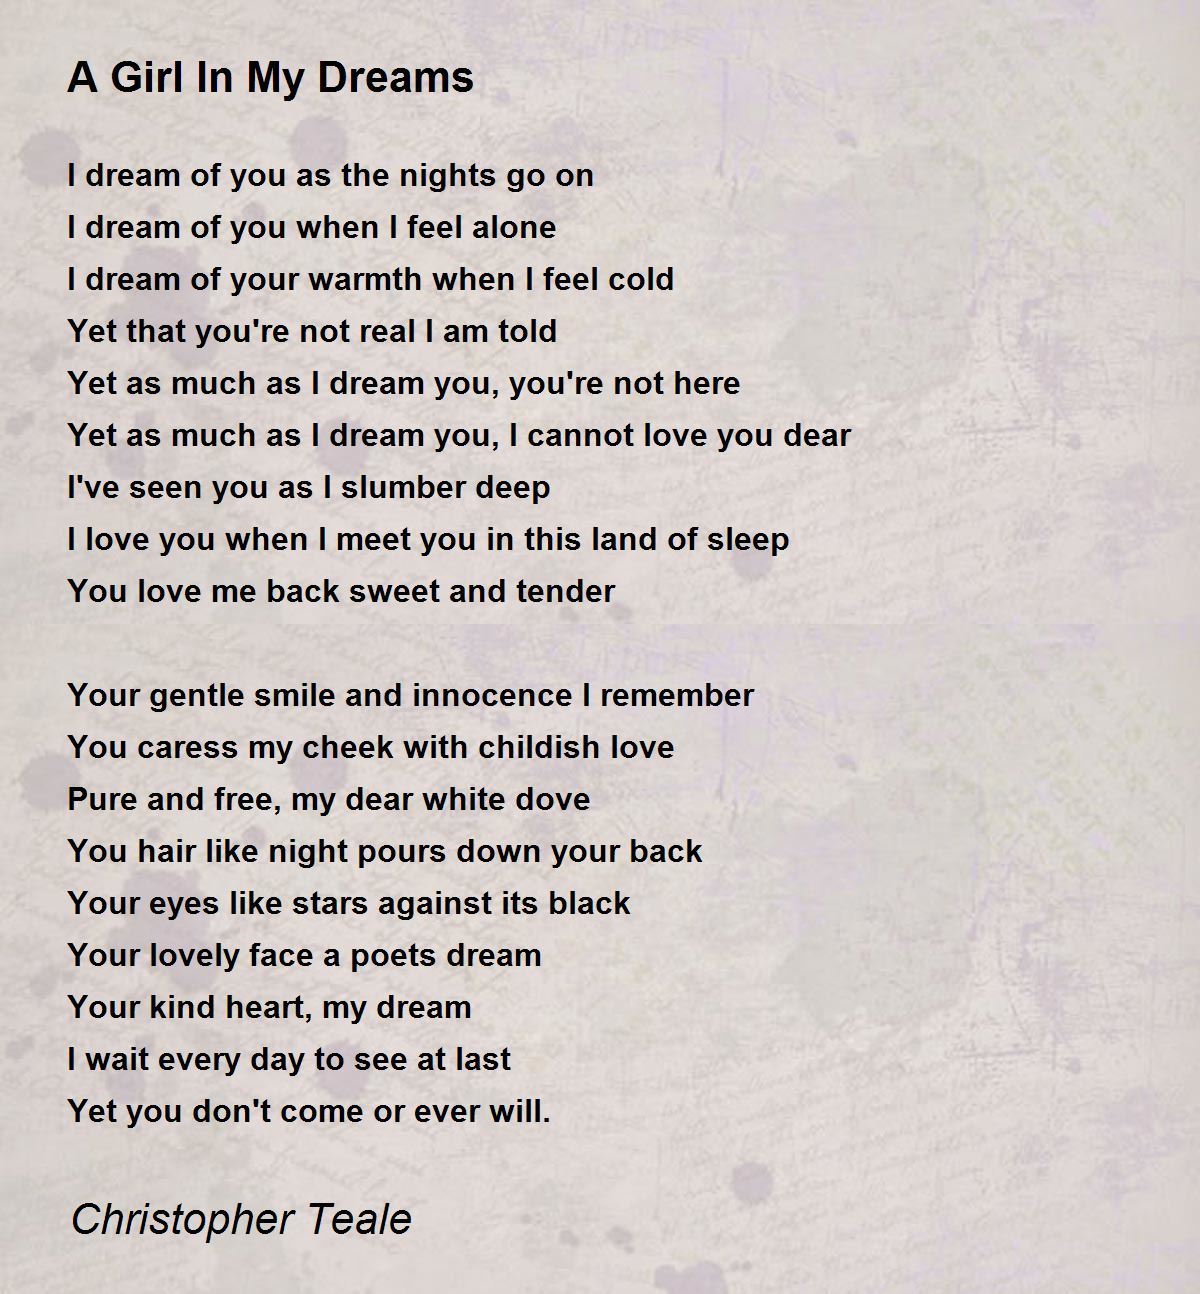 https://img.poemhunter.com/i/poem_images/502/a-girl-in-my-dreams.jpg